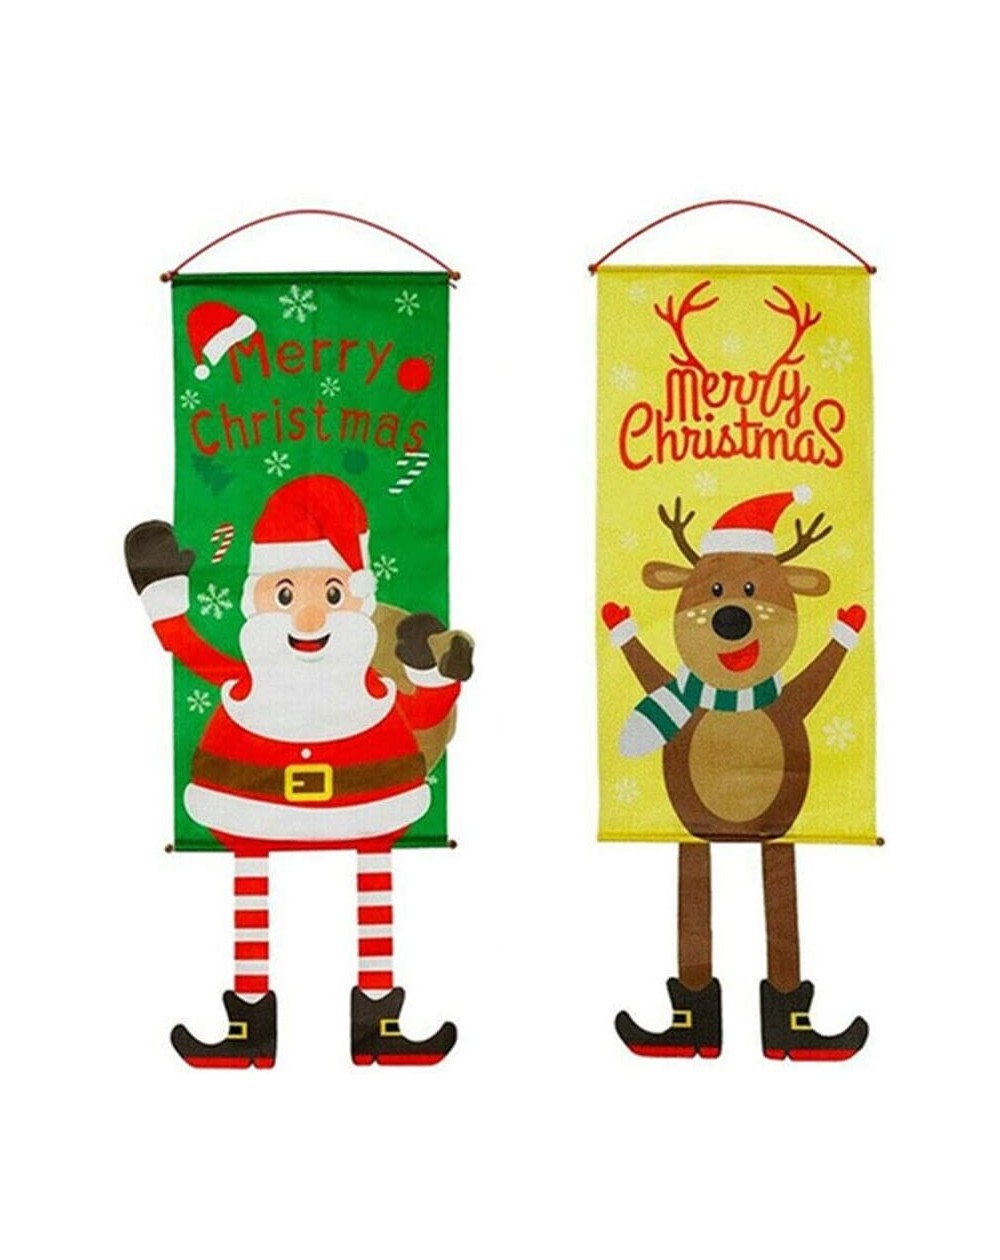 Ornaments Christmas Hanging Flag Door Ornaments Banners Fabric Porch Sign- 2 Pcs Door Banner Hanging Xmas Ornament Party Wind...